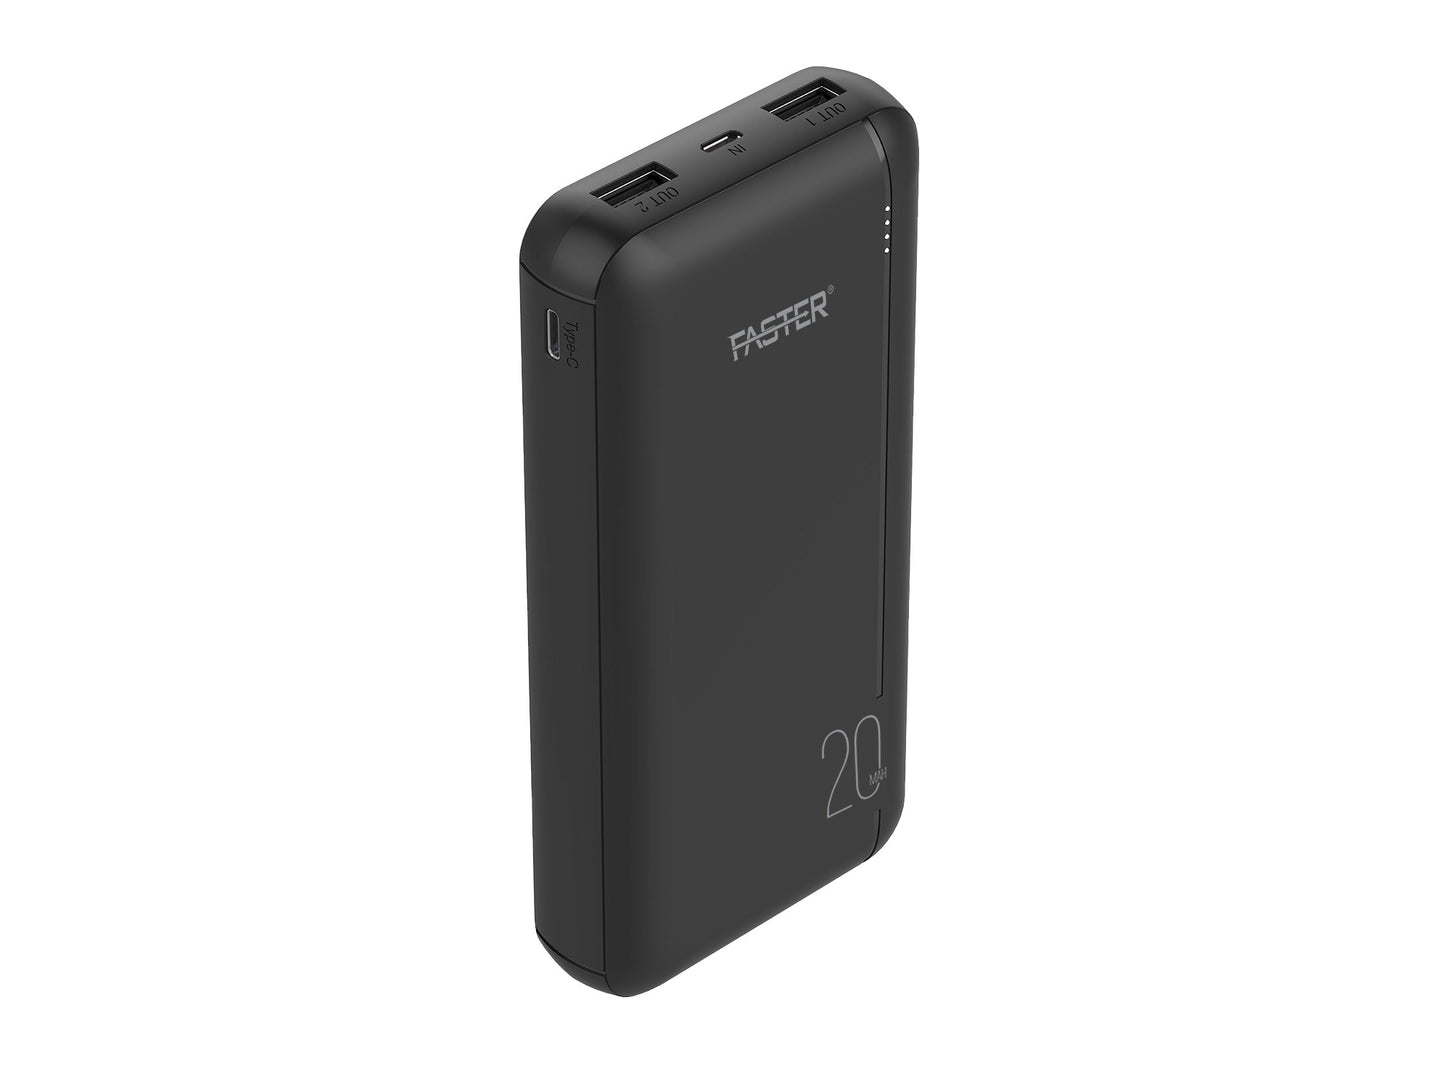 Faster W21 High-Capacity Power Bank Price in Pakistan